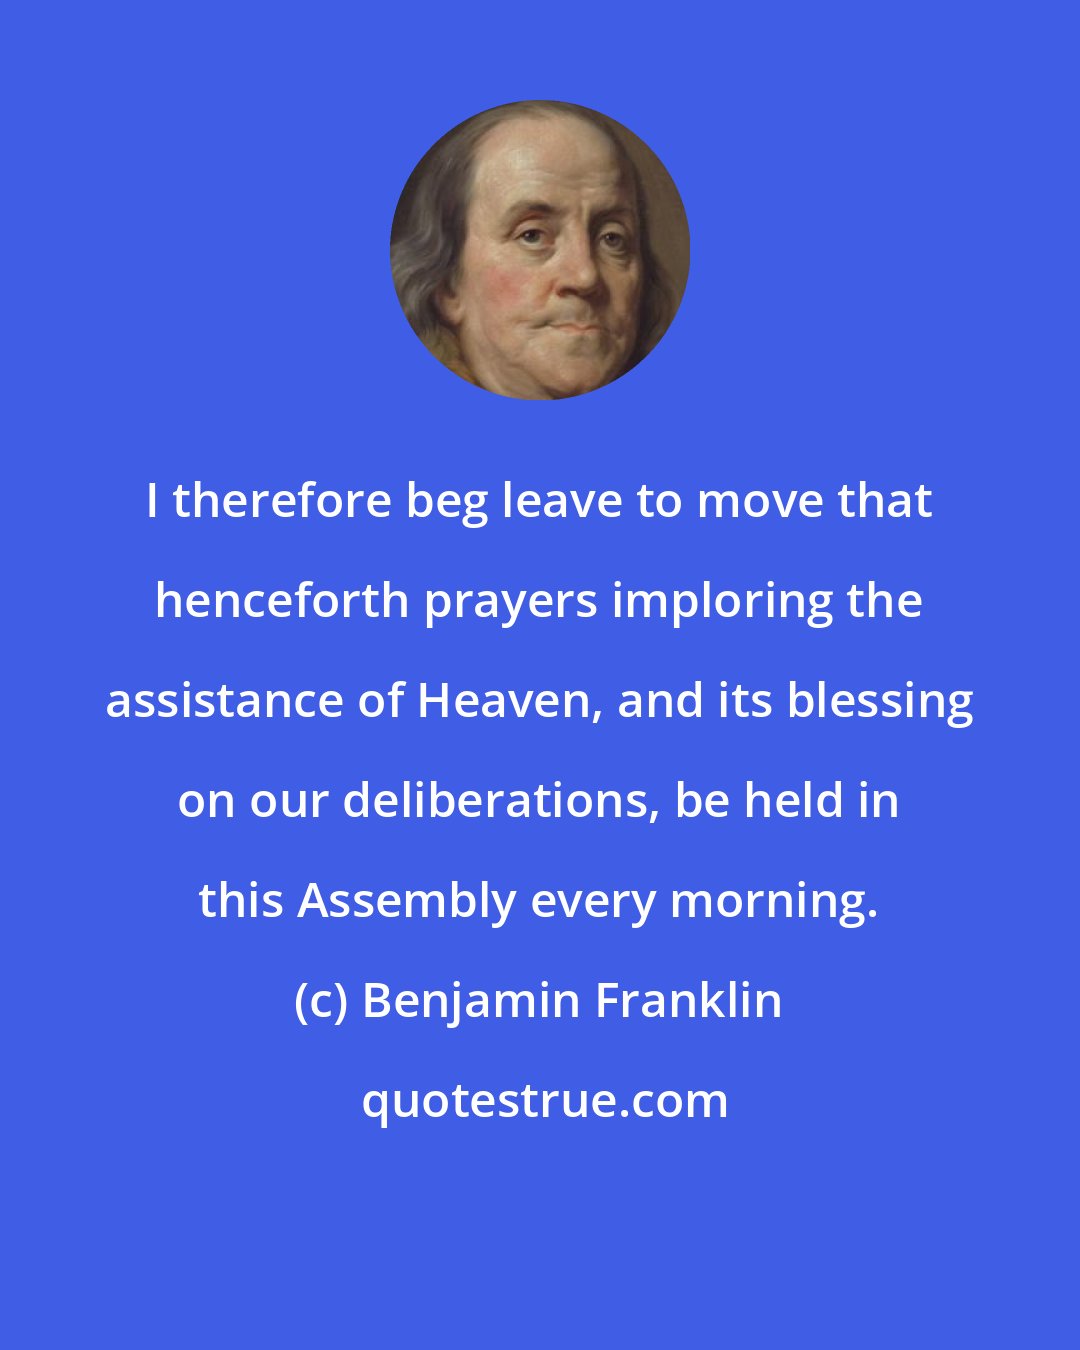 Benjamin Franklin: I therefore beg leave to move that henceforth prayers imploring the assistance of Heaven, and its blessing on our deliberations, be held in this Assembly every morning.